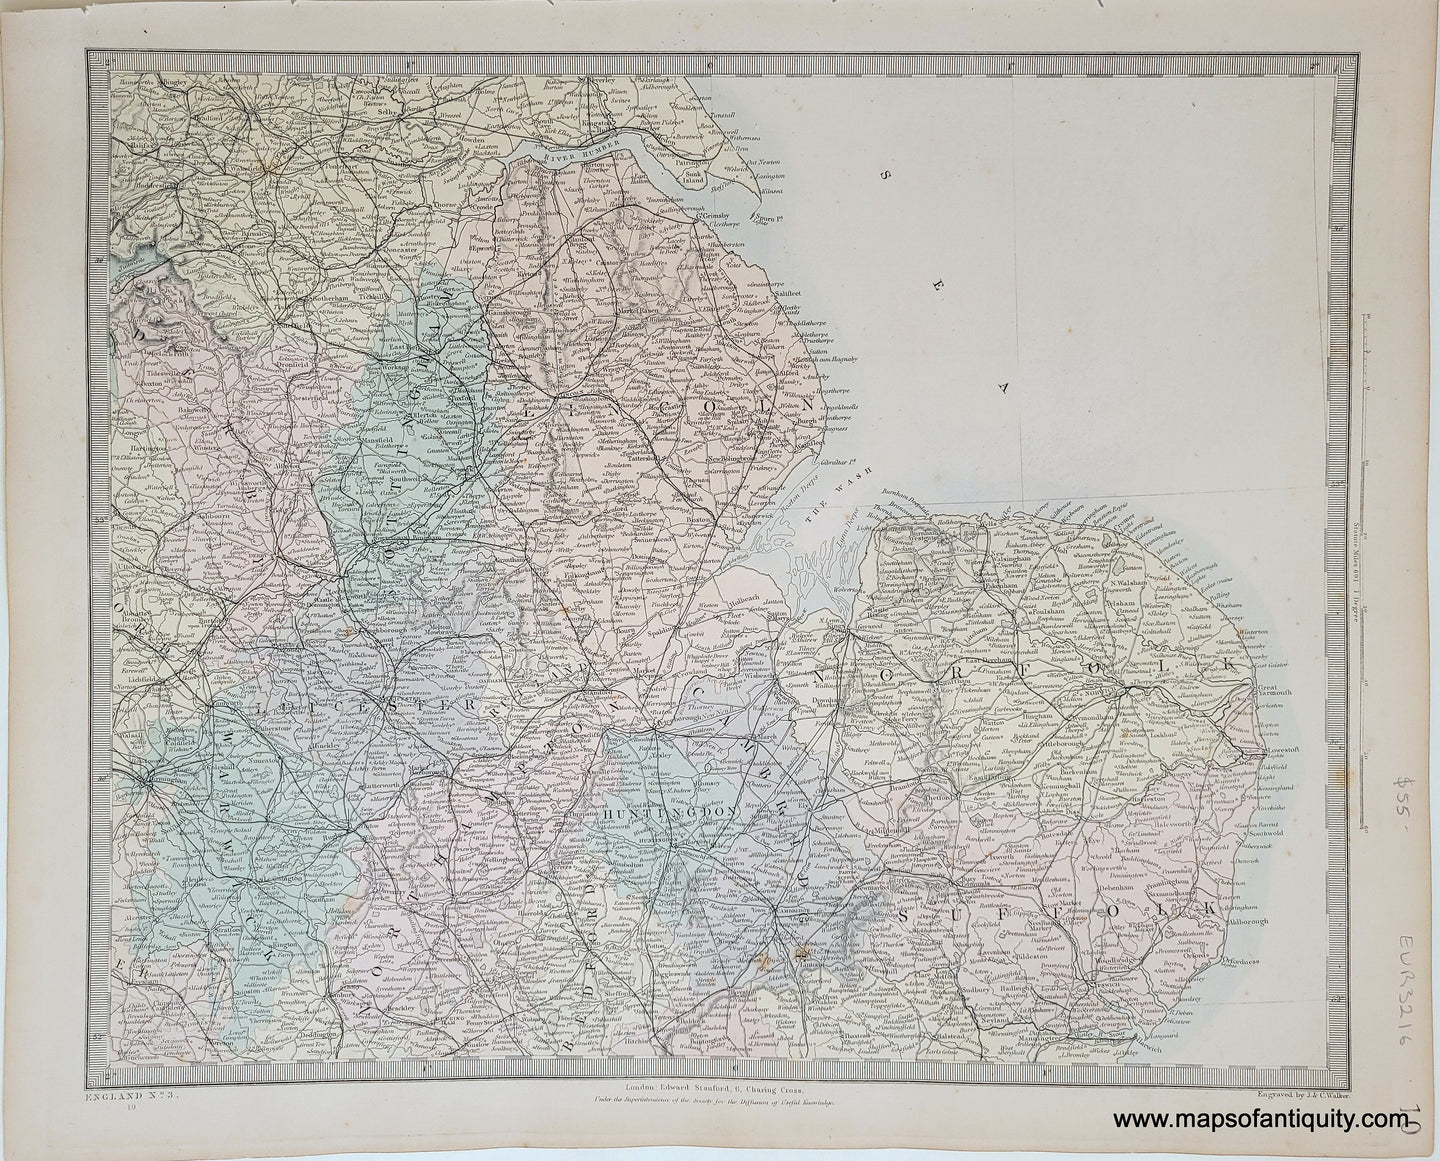 Genuine-Antique-Map-England-and-Wales-in-six-sheets-sheet-3-England-and-Wales--1860-SDUK-Society-for-the-Diffusion-of-Useful-Knowledge-Maps-Of-Antiquity-1800s-19th-century